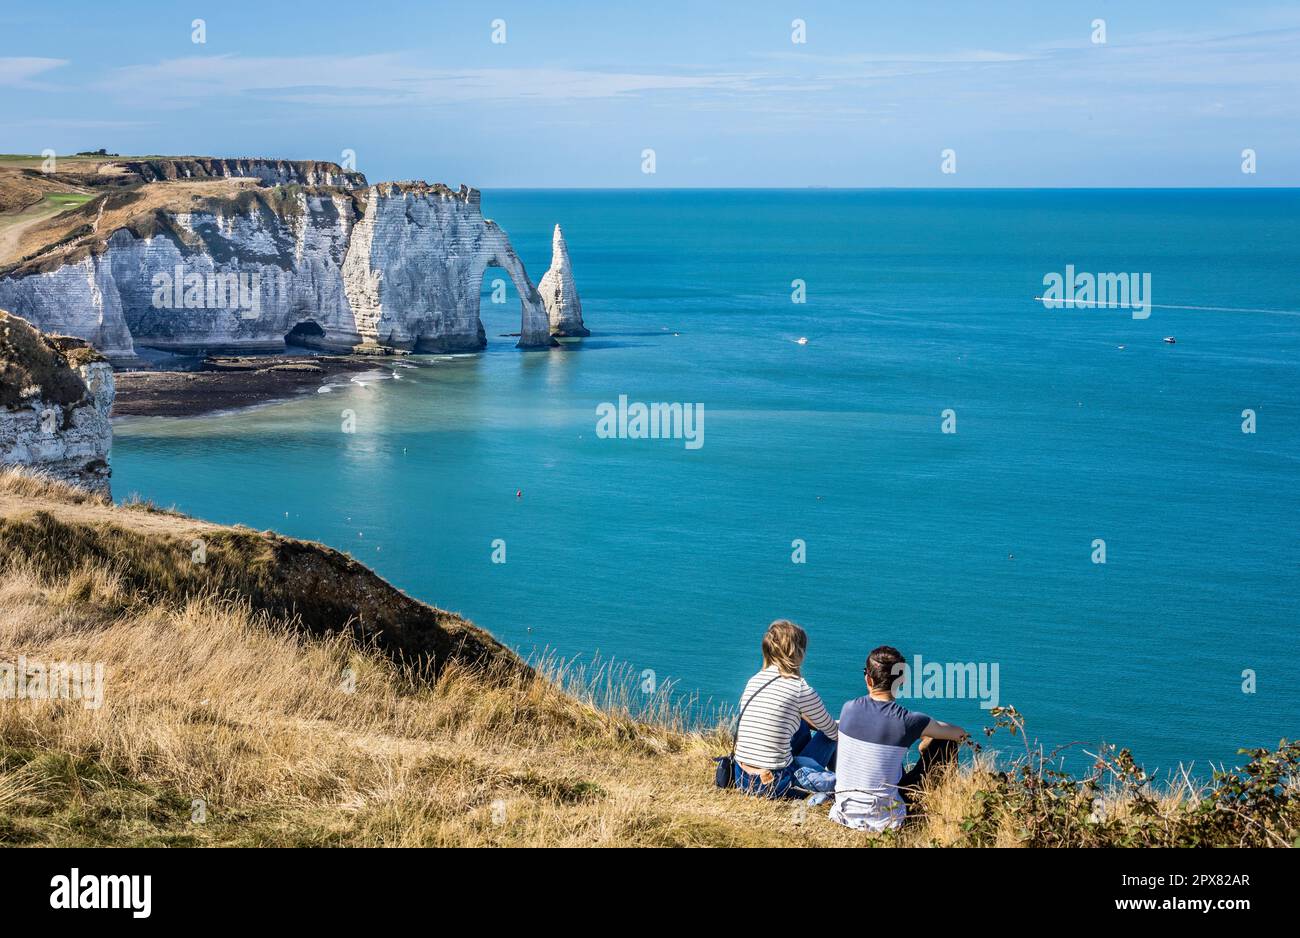 the 70m-high chalk cliff of Falaise d'Aval at Étretat on the Côte d'Albâtre (Alabaster Coast) with  the natural arch of Porte d'Aval and the prominent Stock Photo